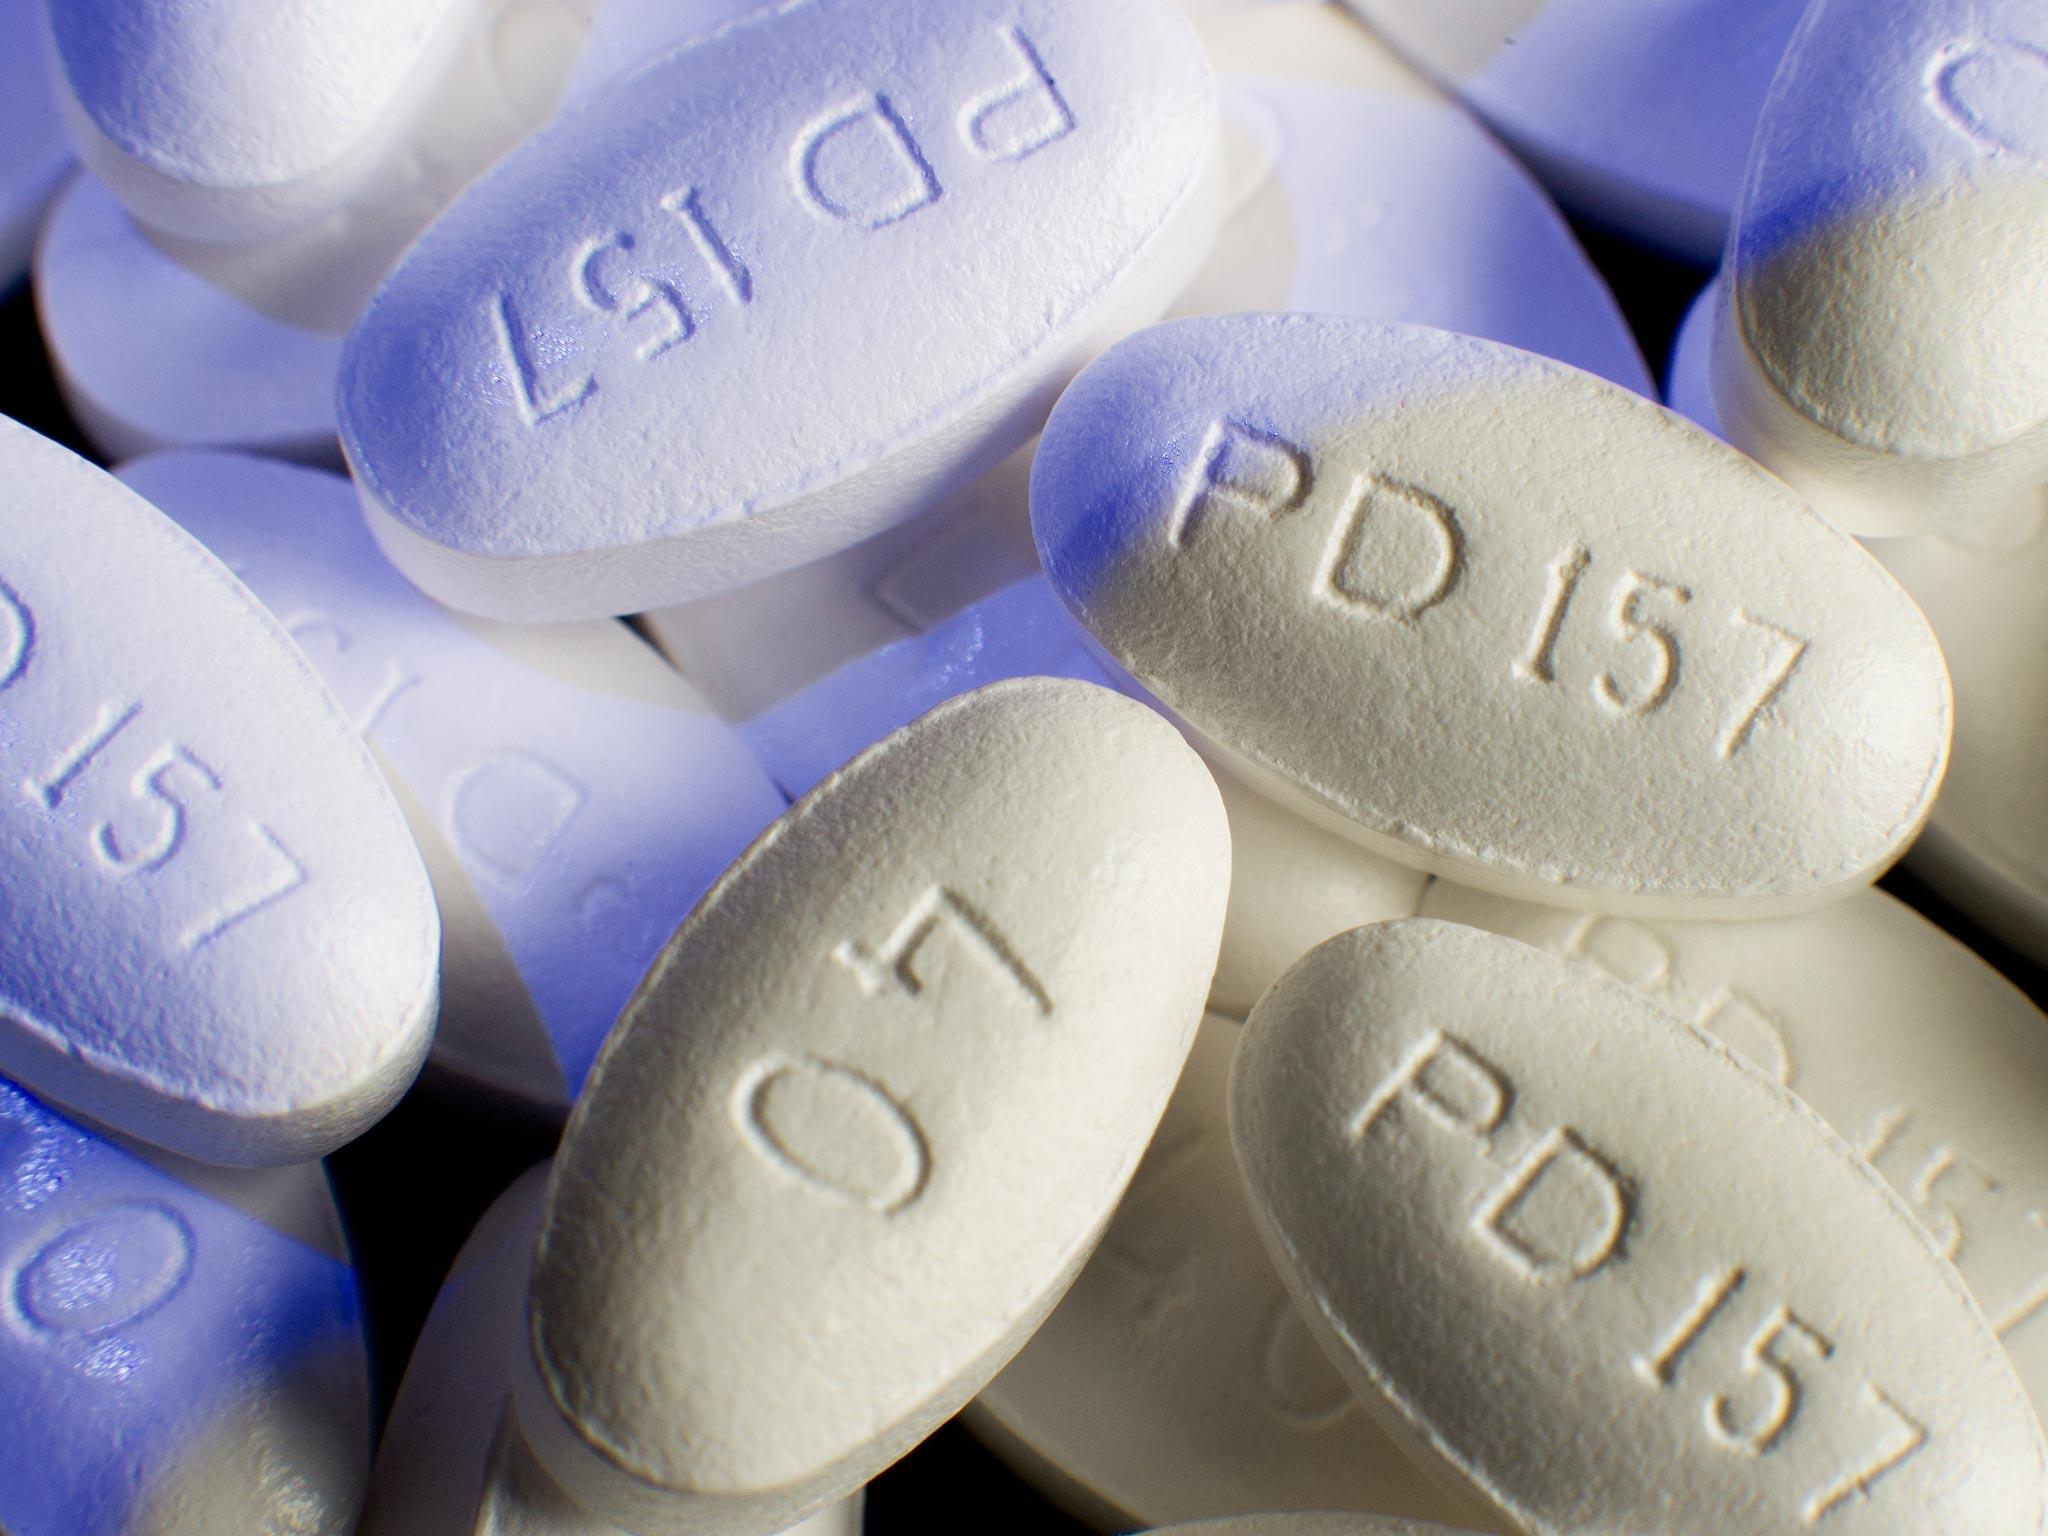 Cholesterol-lowering statins are currently taken by around seven million people in the UK